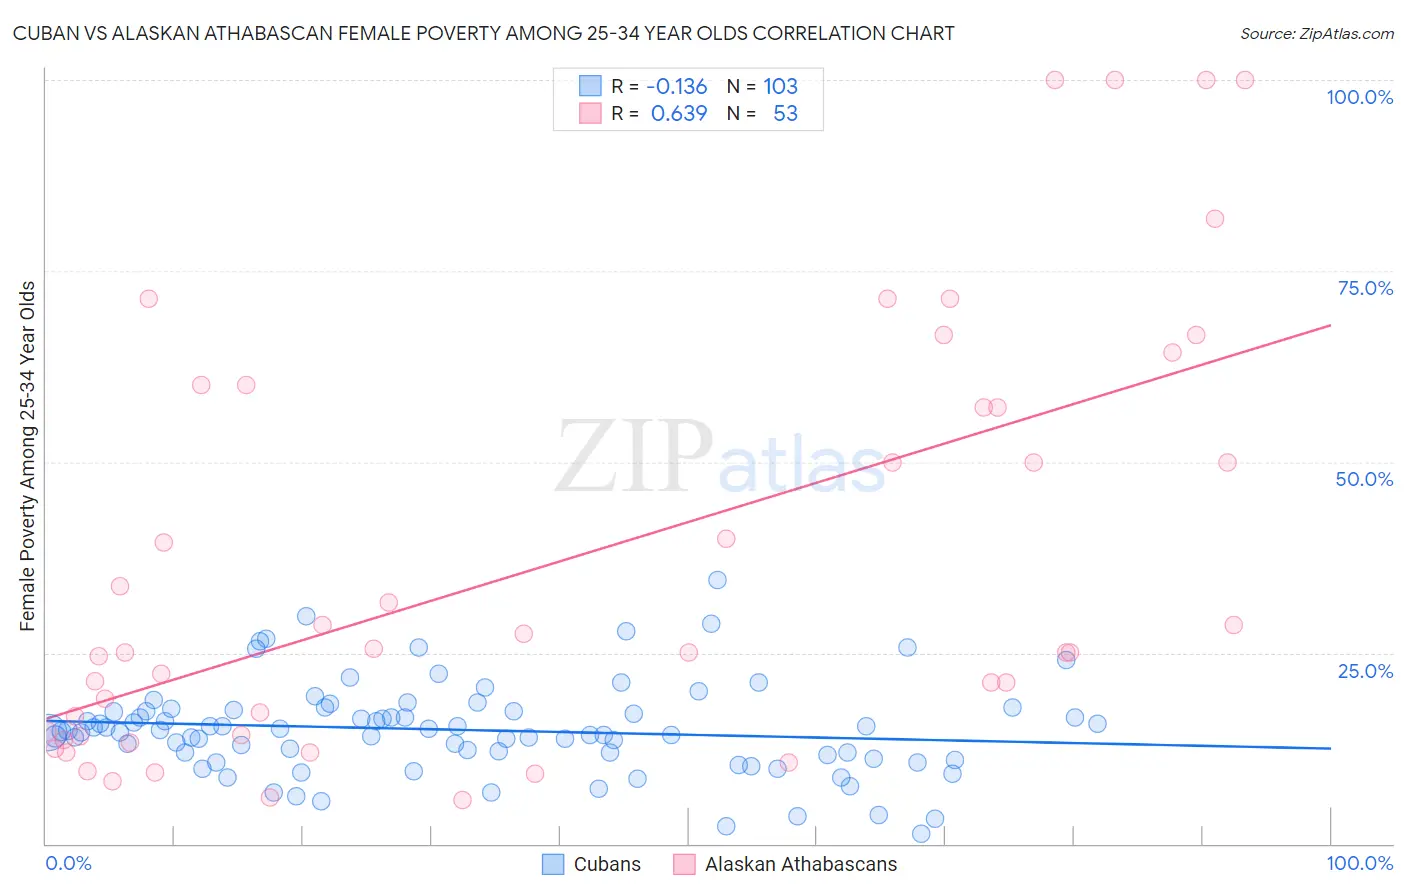 Cuban vs Alaskan Athabascan Female Poverty Among 25-34 Year Olds